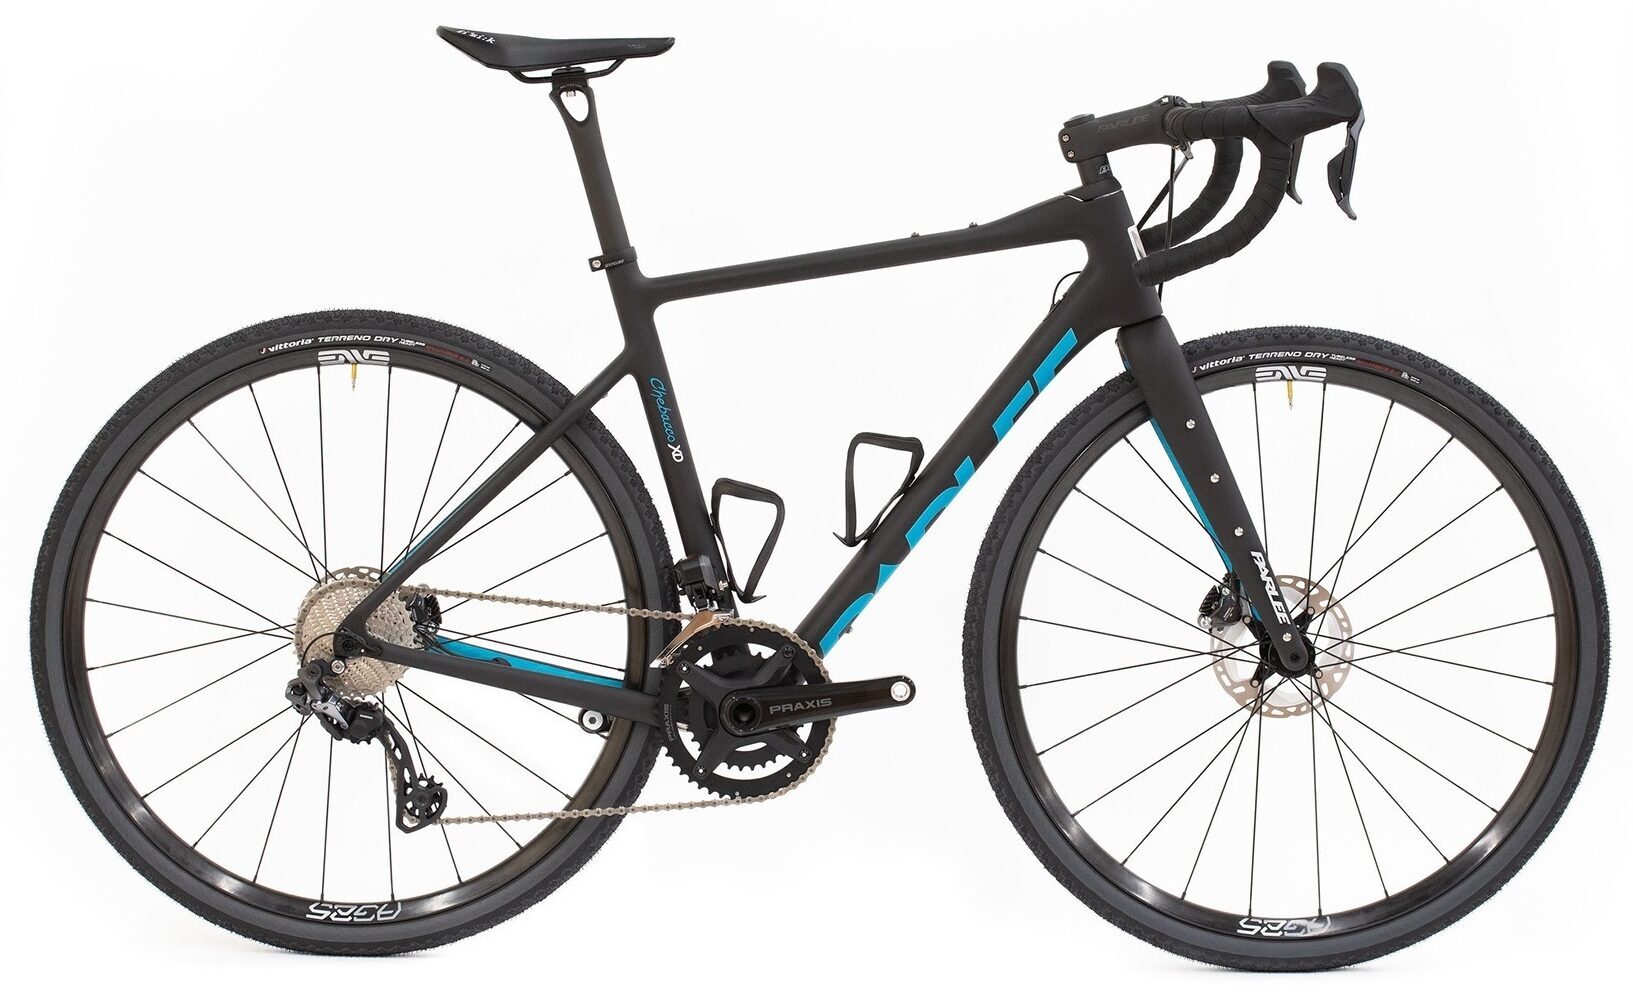 Parlee chebacco XDLE2